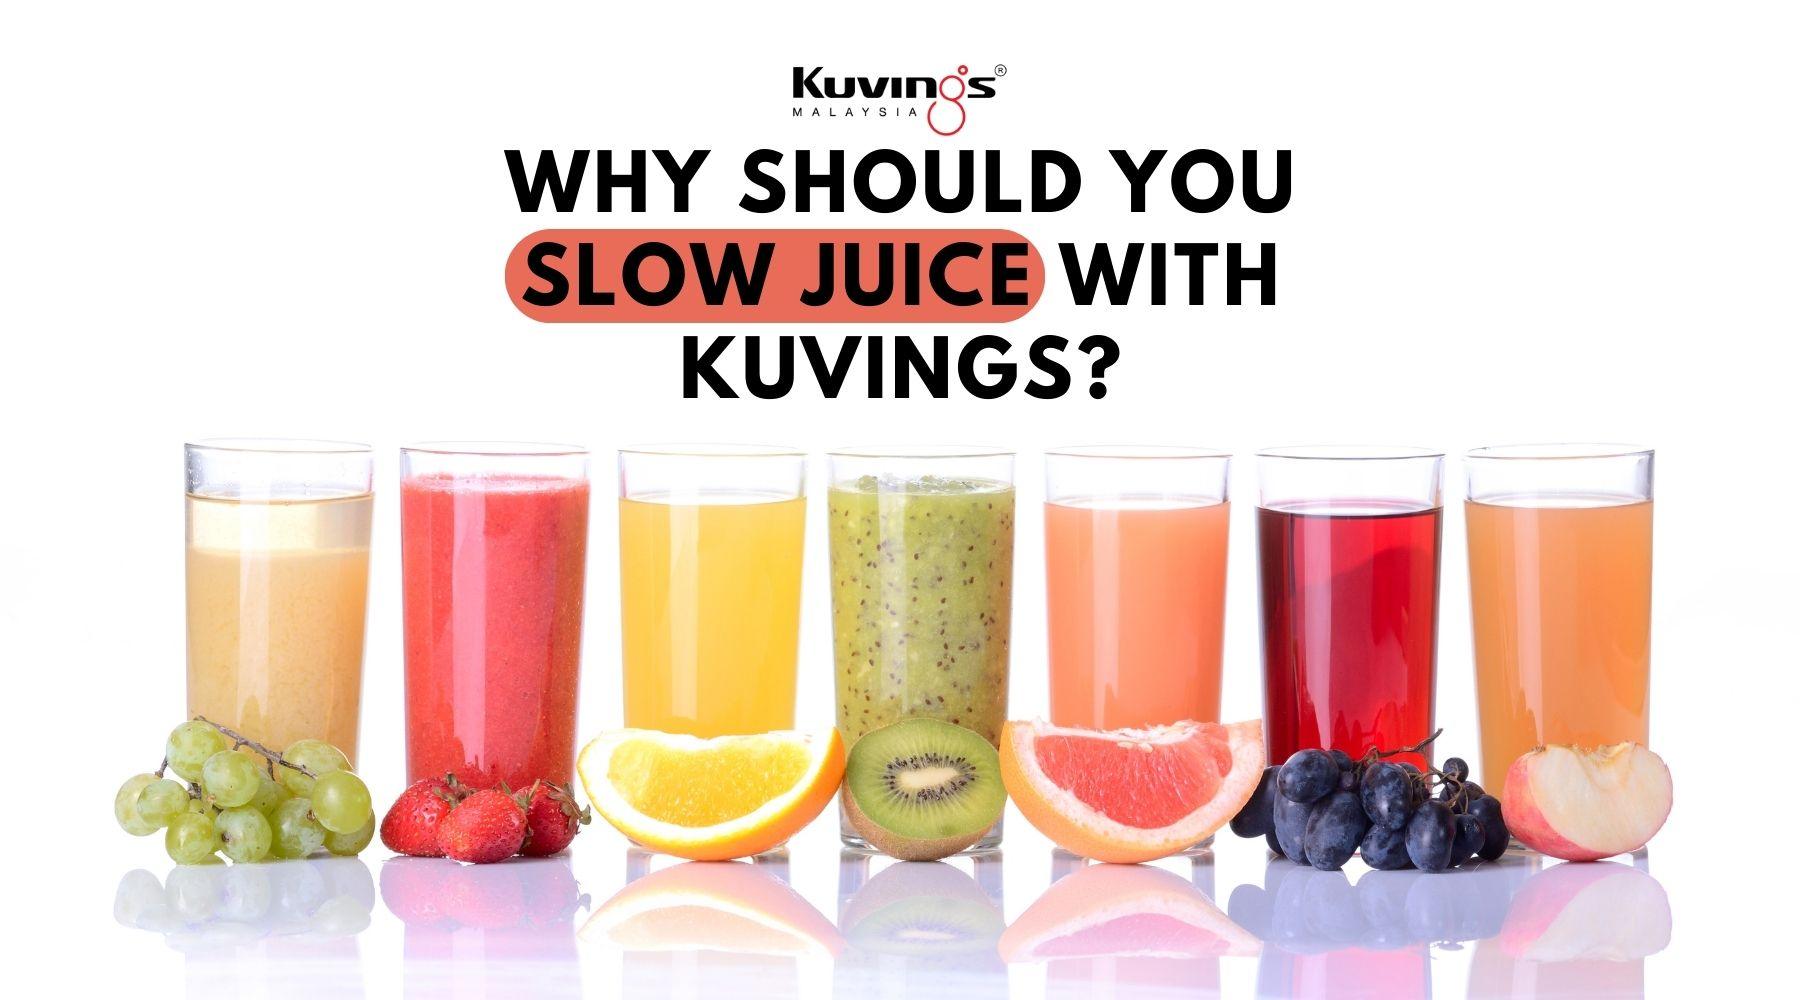 Why Should You Slow Juice With Kuvings? - Kuvings.my